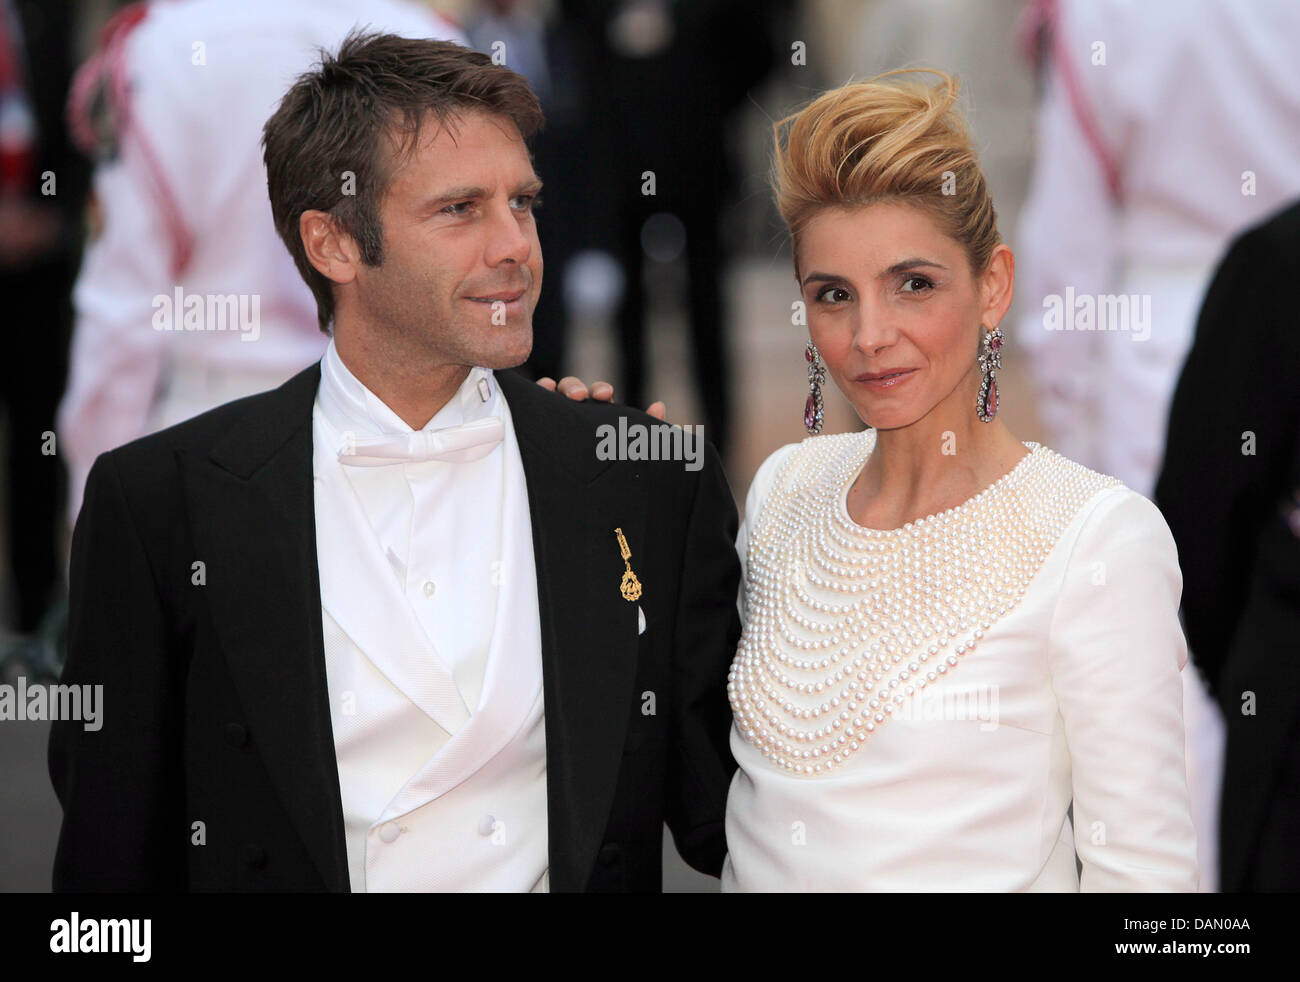 Prince Emanuele Filiberto of Venice and Piedmont and French actress Clotilde Courau, Princess of Venice and Piedmont,  attend the official dinner on the Opera terraces after the religious wedding of Prince Albert II and Princess Charlene of Monaco in Monaco, 02 July 2011. 450 guests have been invited for the dinner followed by a ball in the Opera. Photo: Albert Nieboer Stock Photo